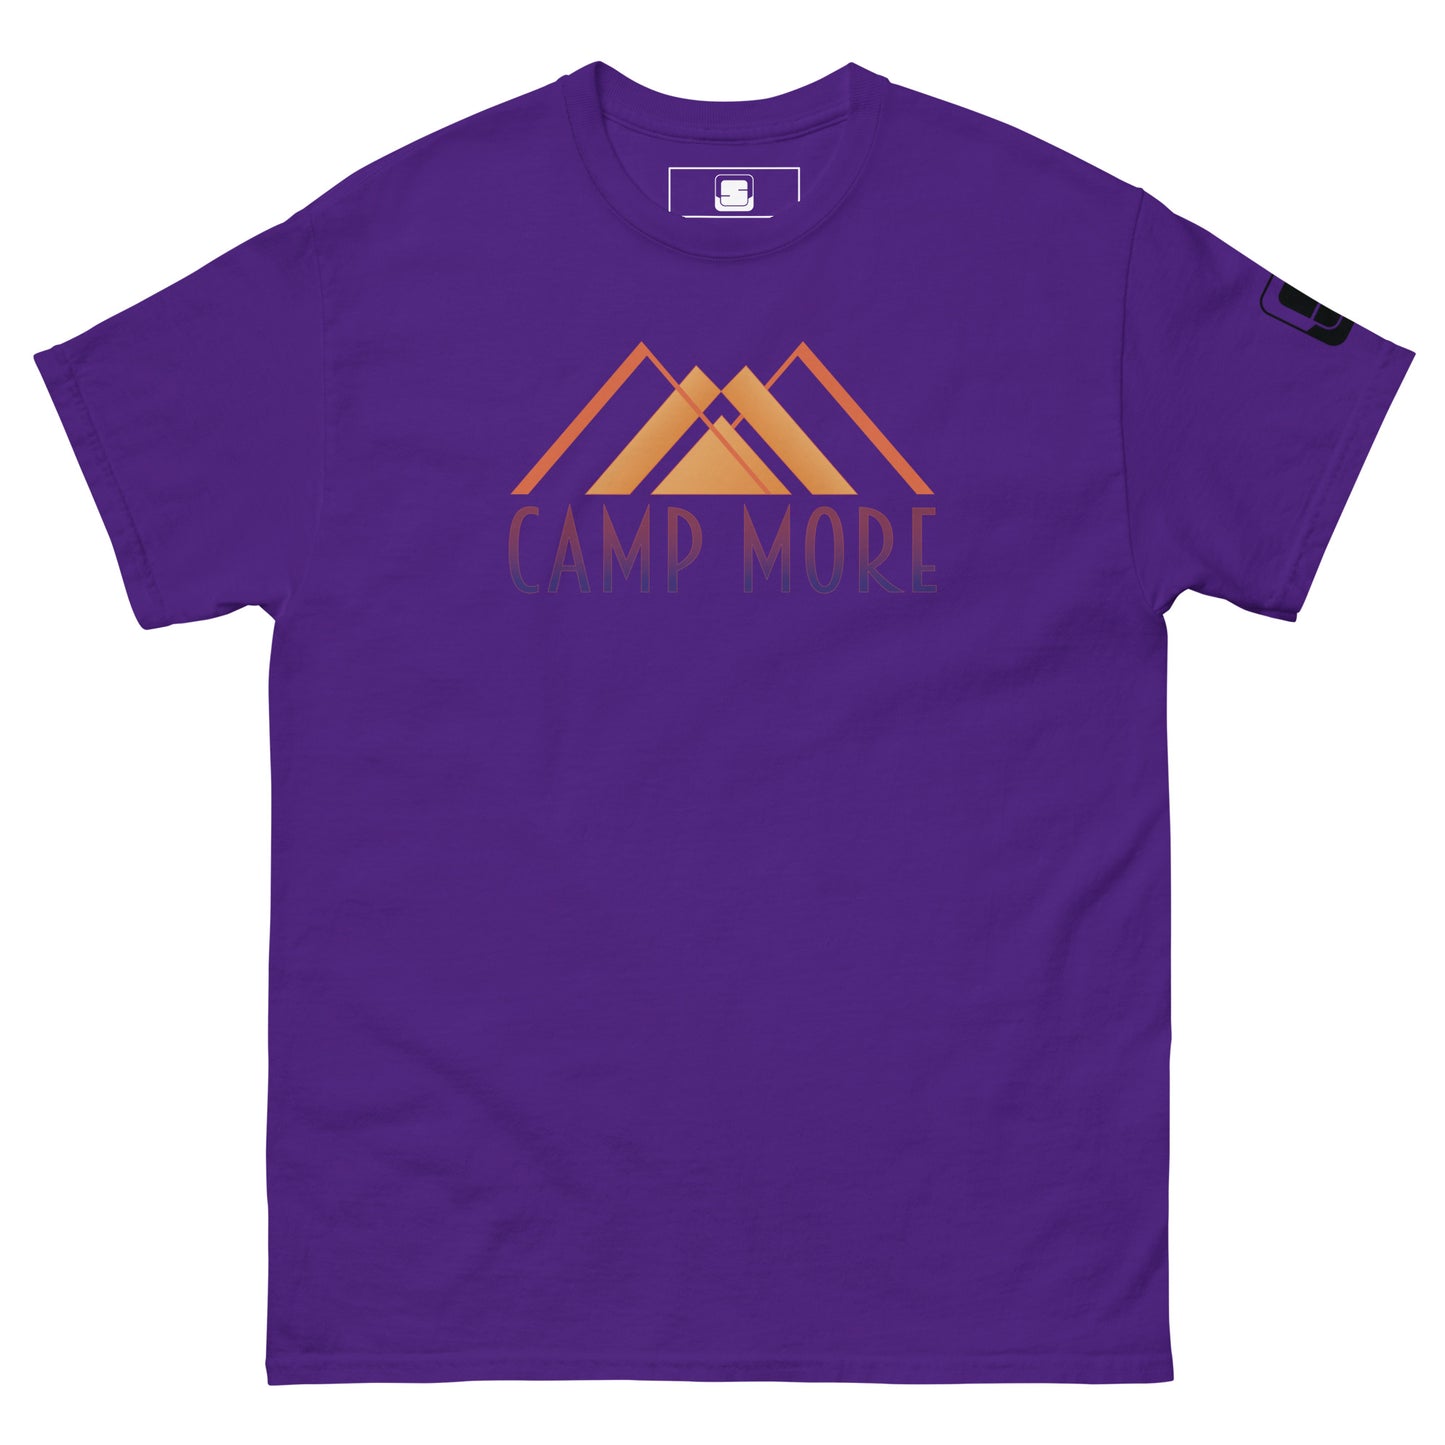 Purple t-shirt laid flat showcasing the 'CAMP MORE' slogan in purple with an orange mountain range illustration, complete with a black logo patch on the sleeve, isolated on a white background.